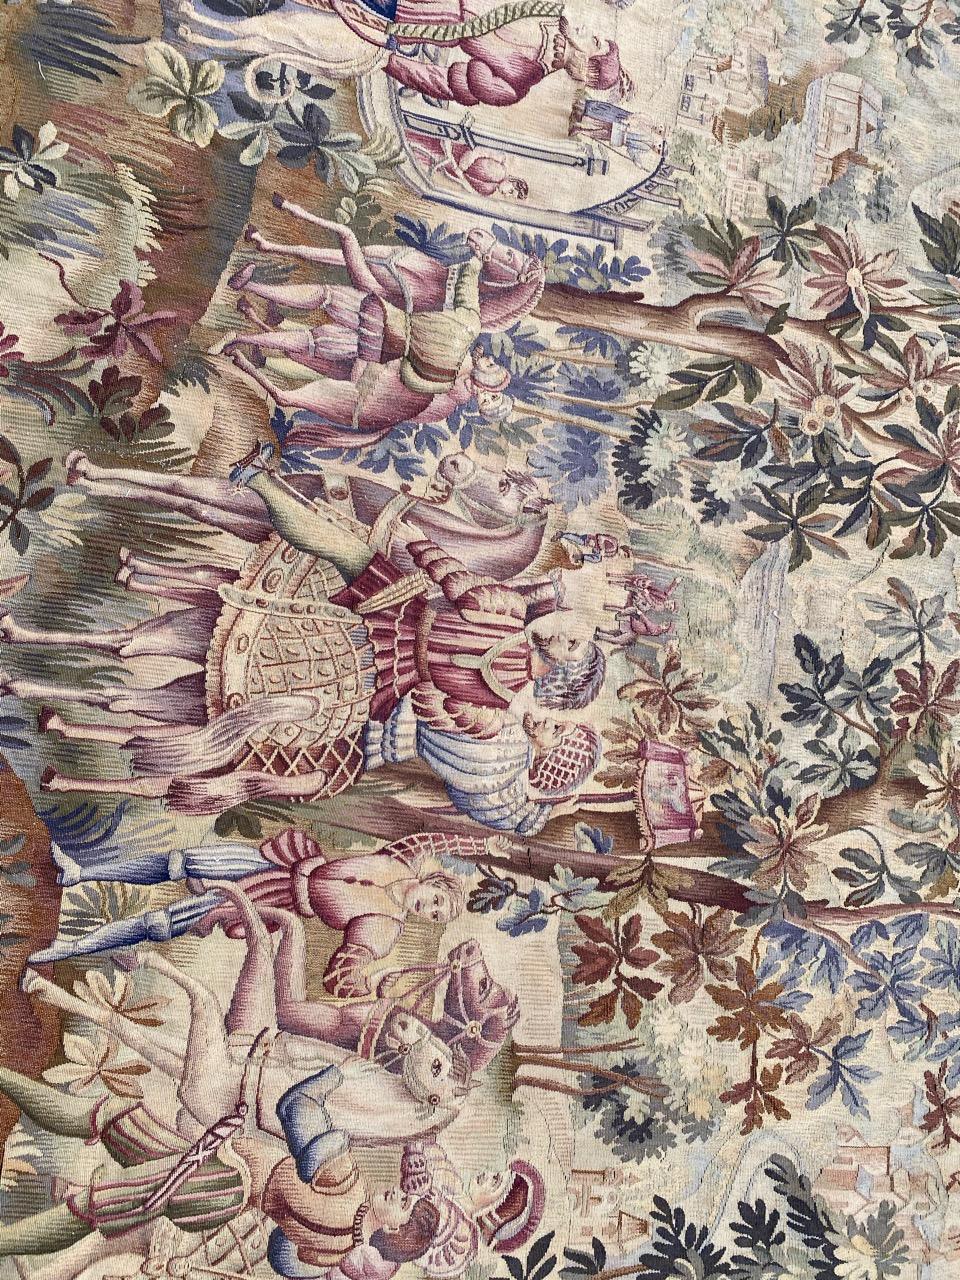 Very beautiful late 19th century French Aubusson tapestry with beautiful design of older tapestries probably with Maximilian historical design, and nice colors, entirely handwoven with wool and silk on cotton foundation.